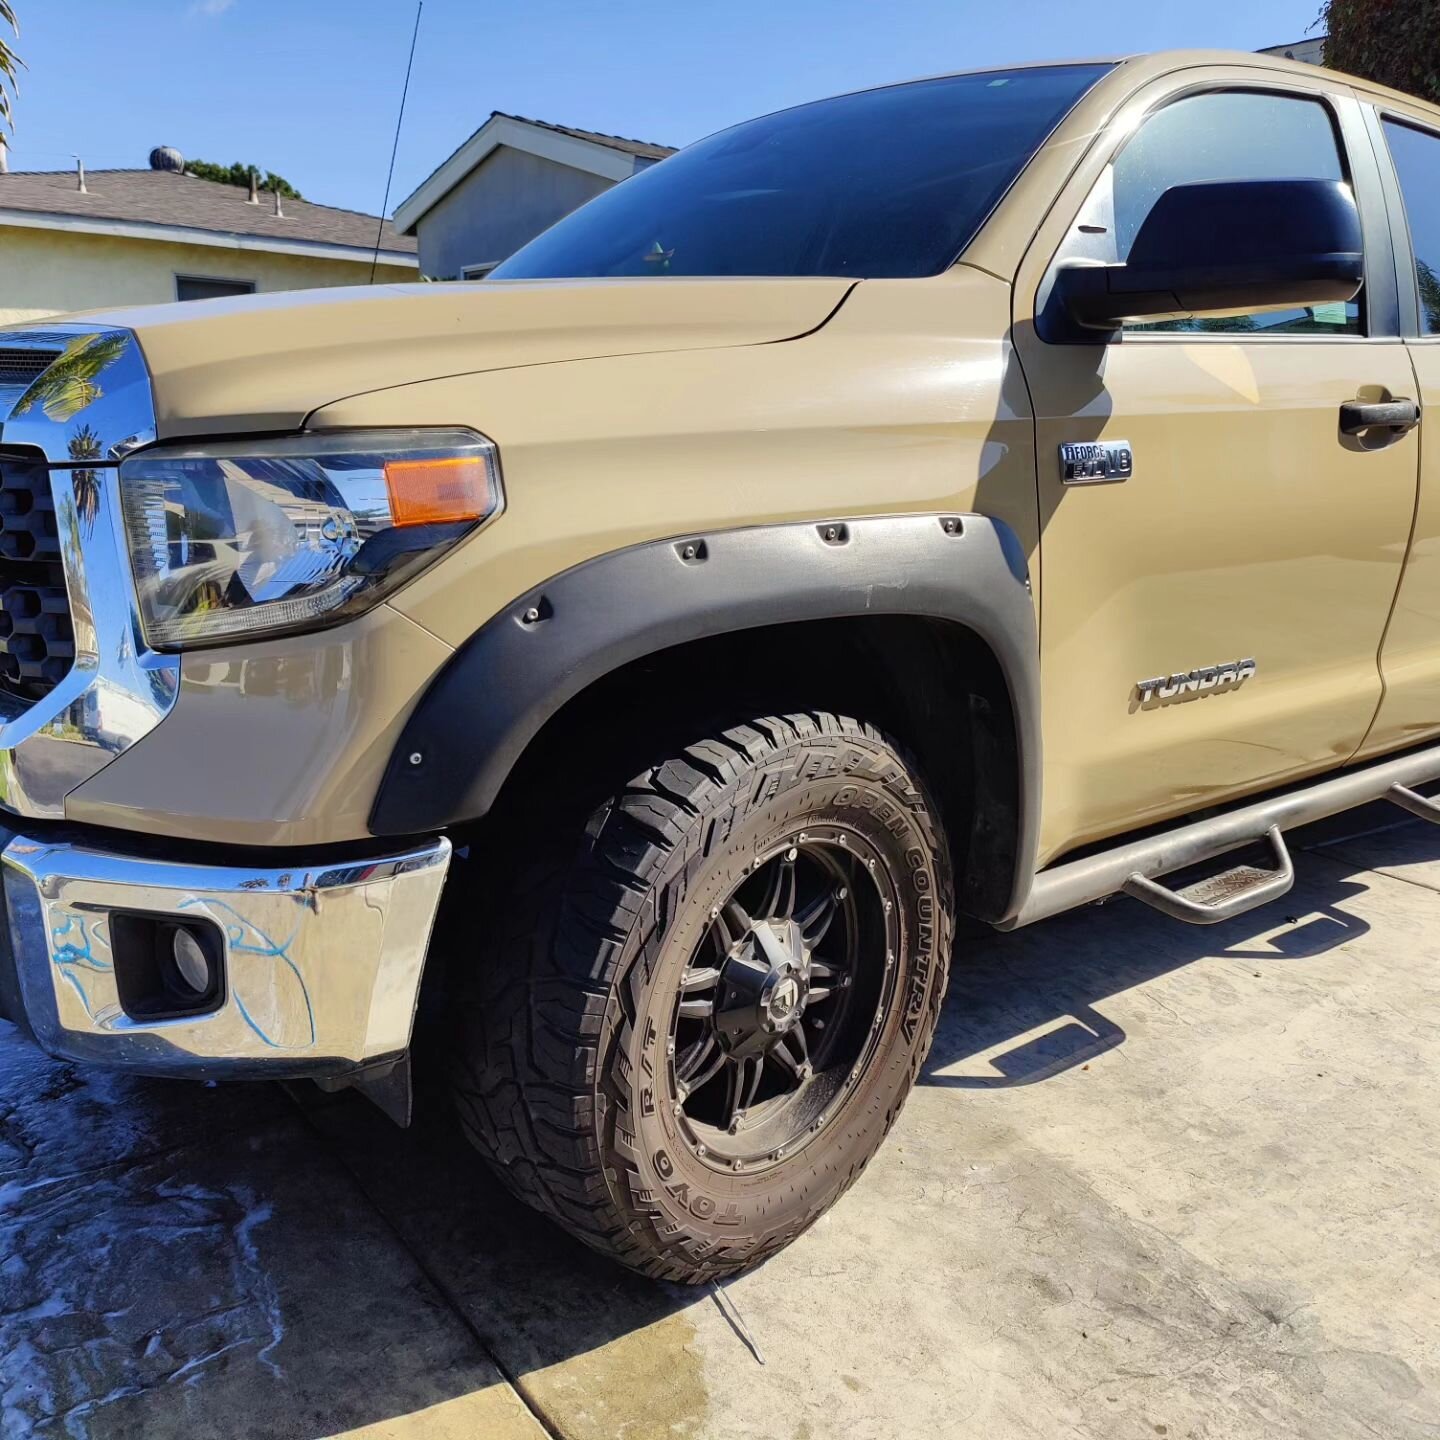 A Full Detail done on a Tundra V8, Took a Long Time to finish but such beautiful results! Book your next detail now!
.
.
.
.
.
.
.
.
#detailing #carwash #tundra #polish #detail #details #beforeandafter #longbeach #localbusiness #cardetailing #truckde